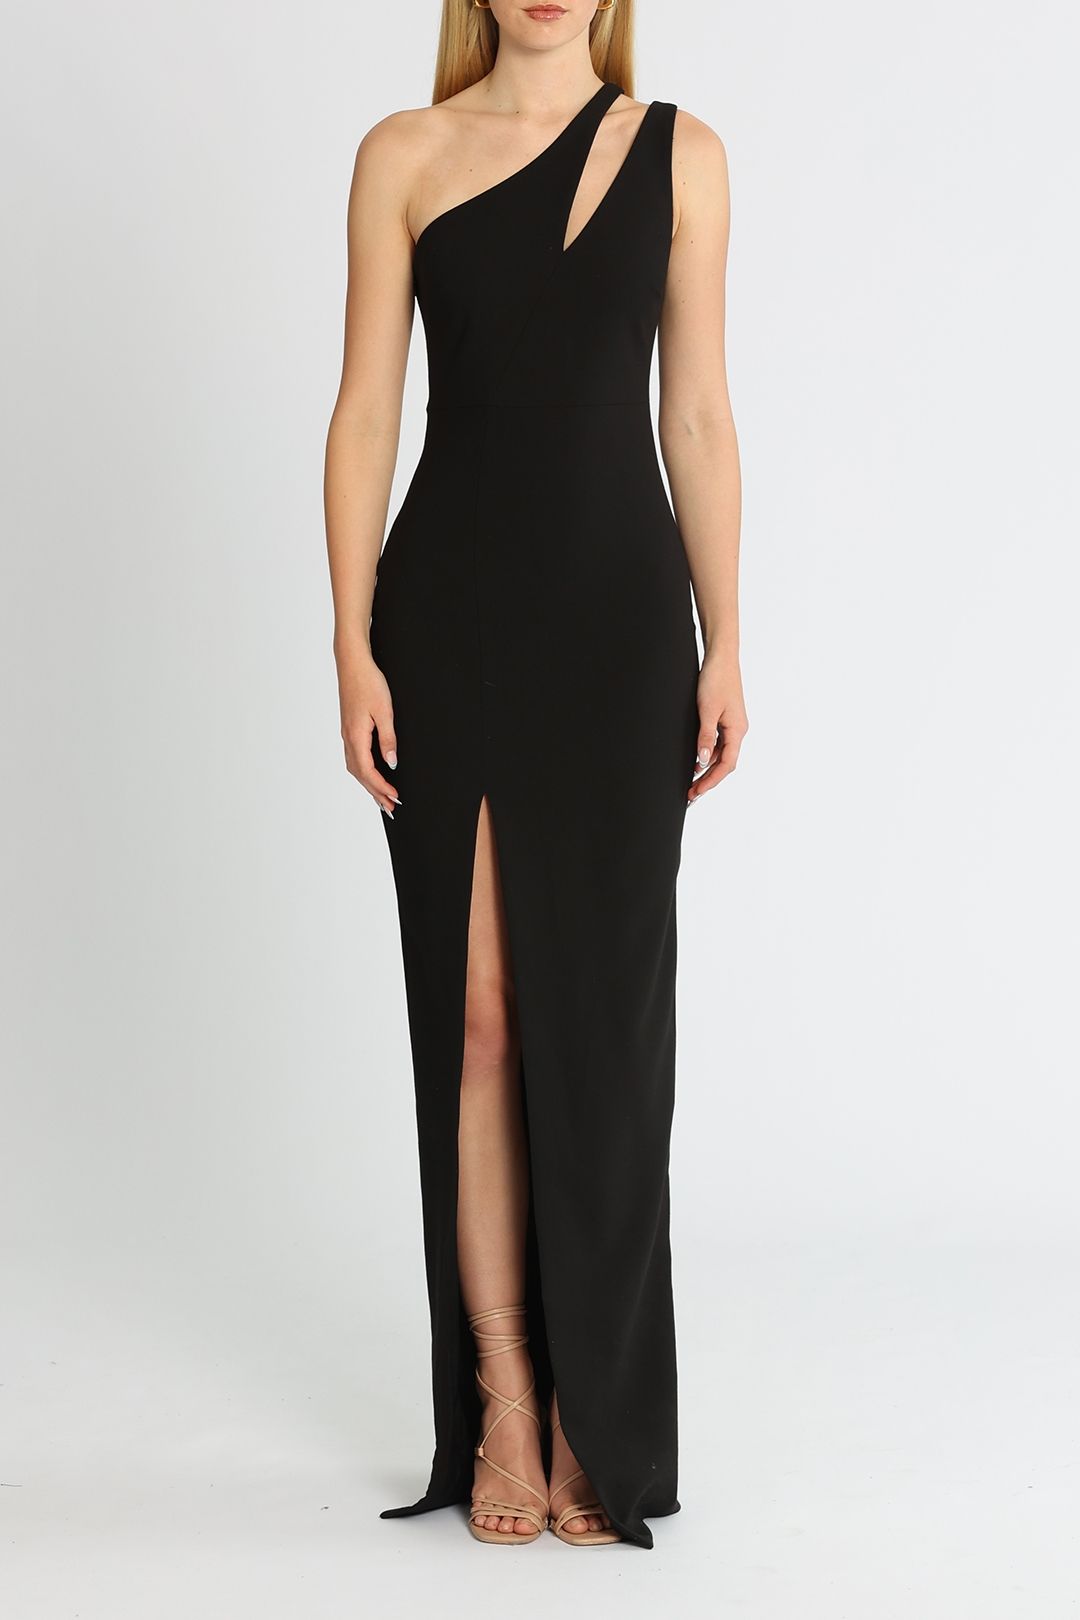 Likely NYC Roxy Gown 